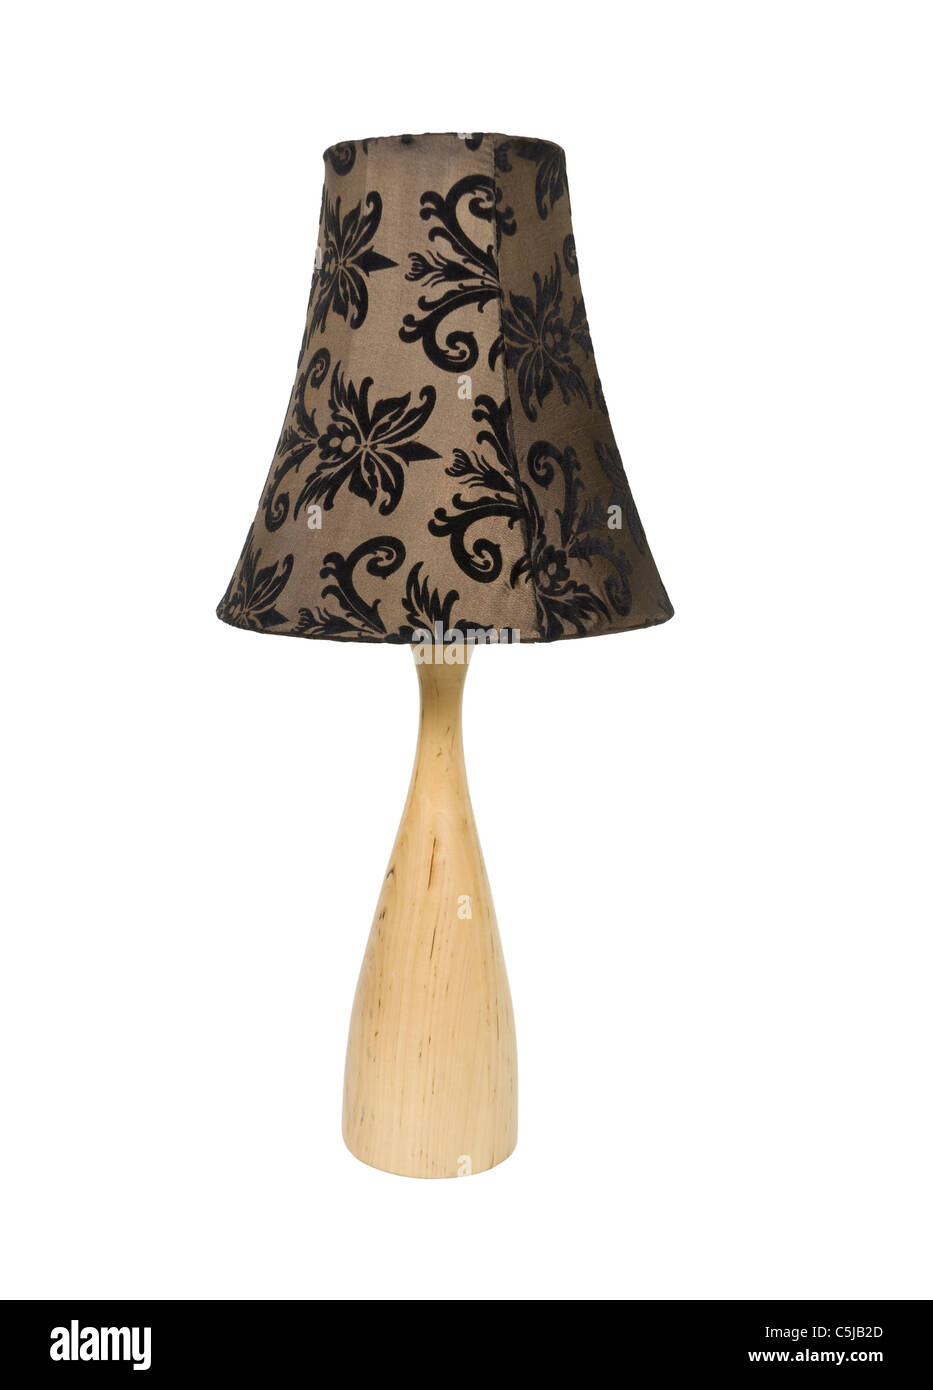 Leafy and swirled patterned lamp shade giving a plain appliance and updated look - path included Stock Photo